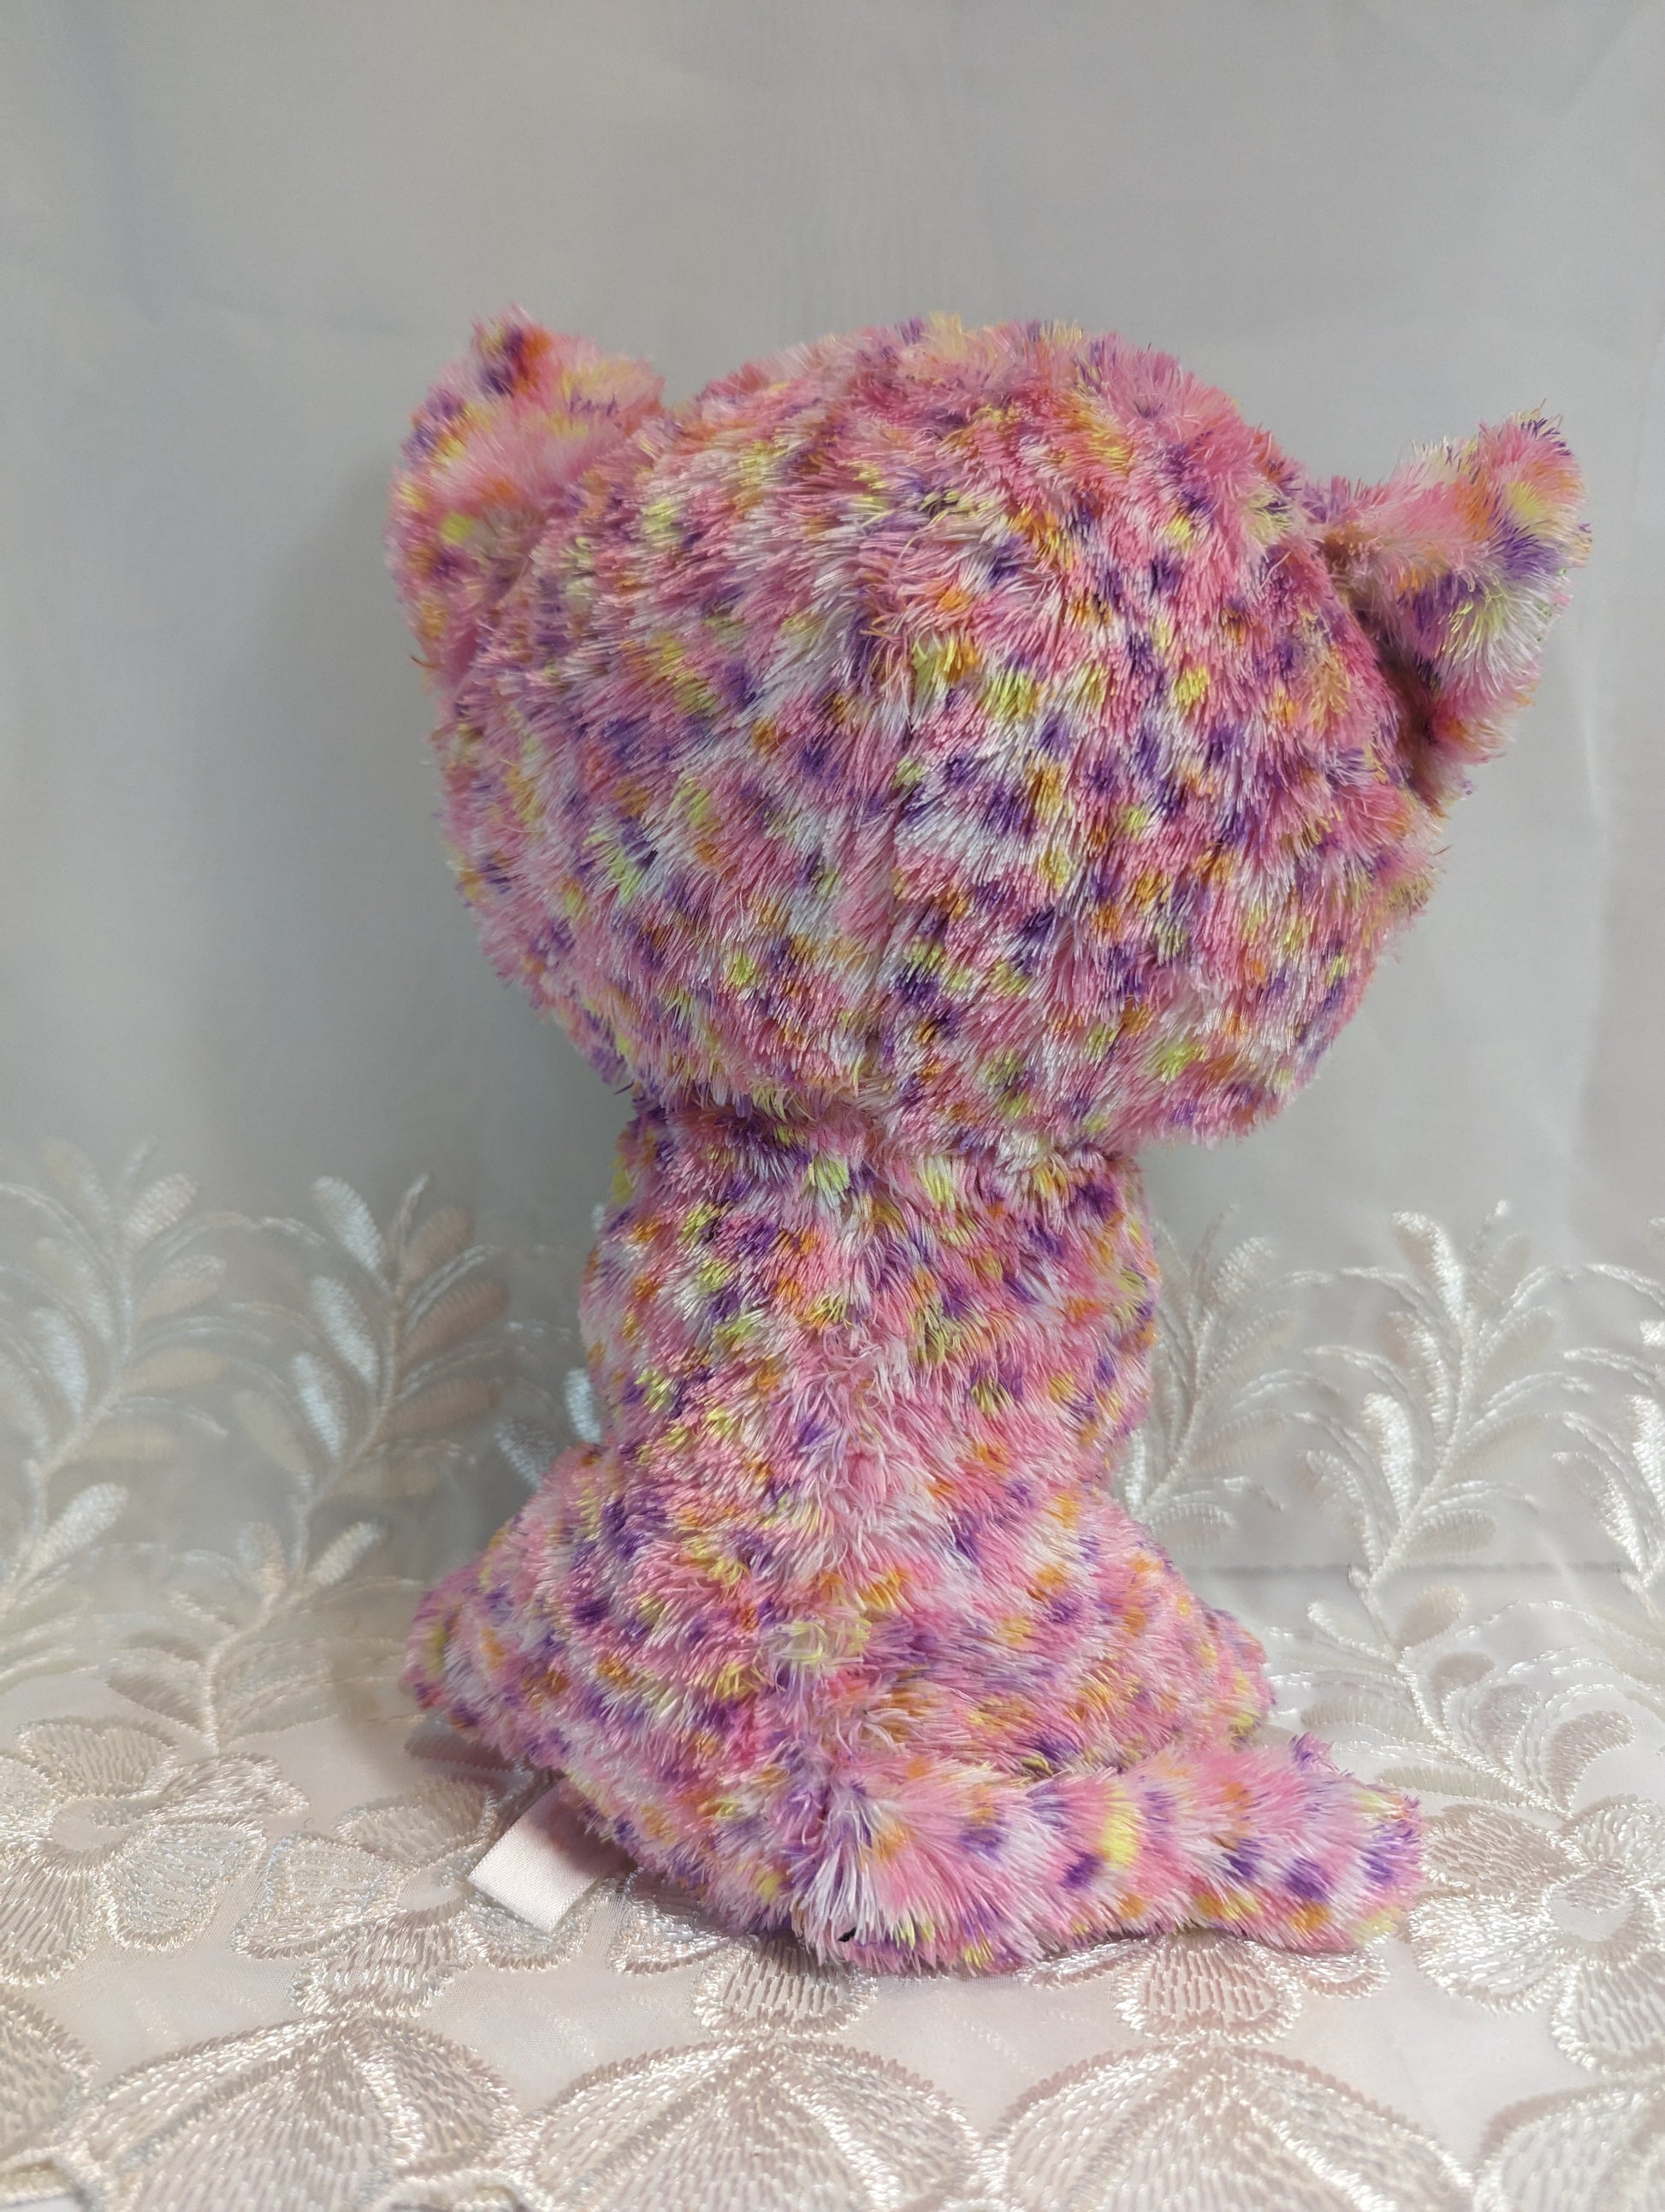 Ty Beanie Boo - Sophie The Pink Cat (9in) No Tags, Scuffed Eyes - Vintage Beanies Canada